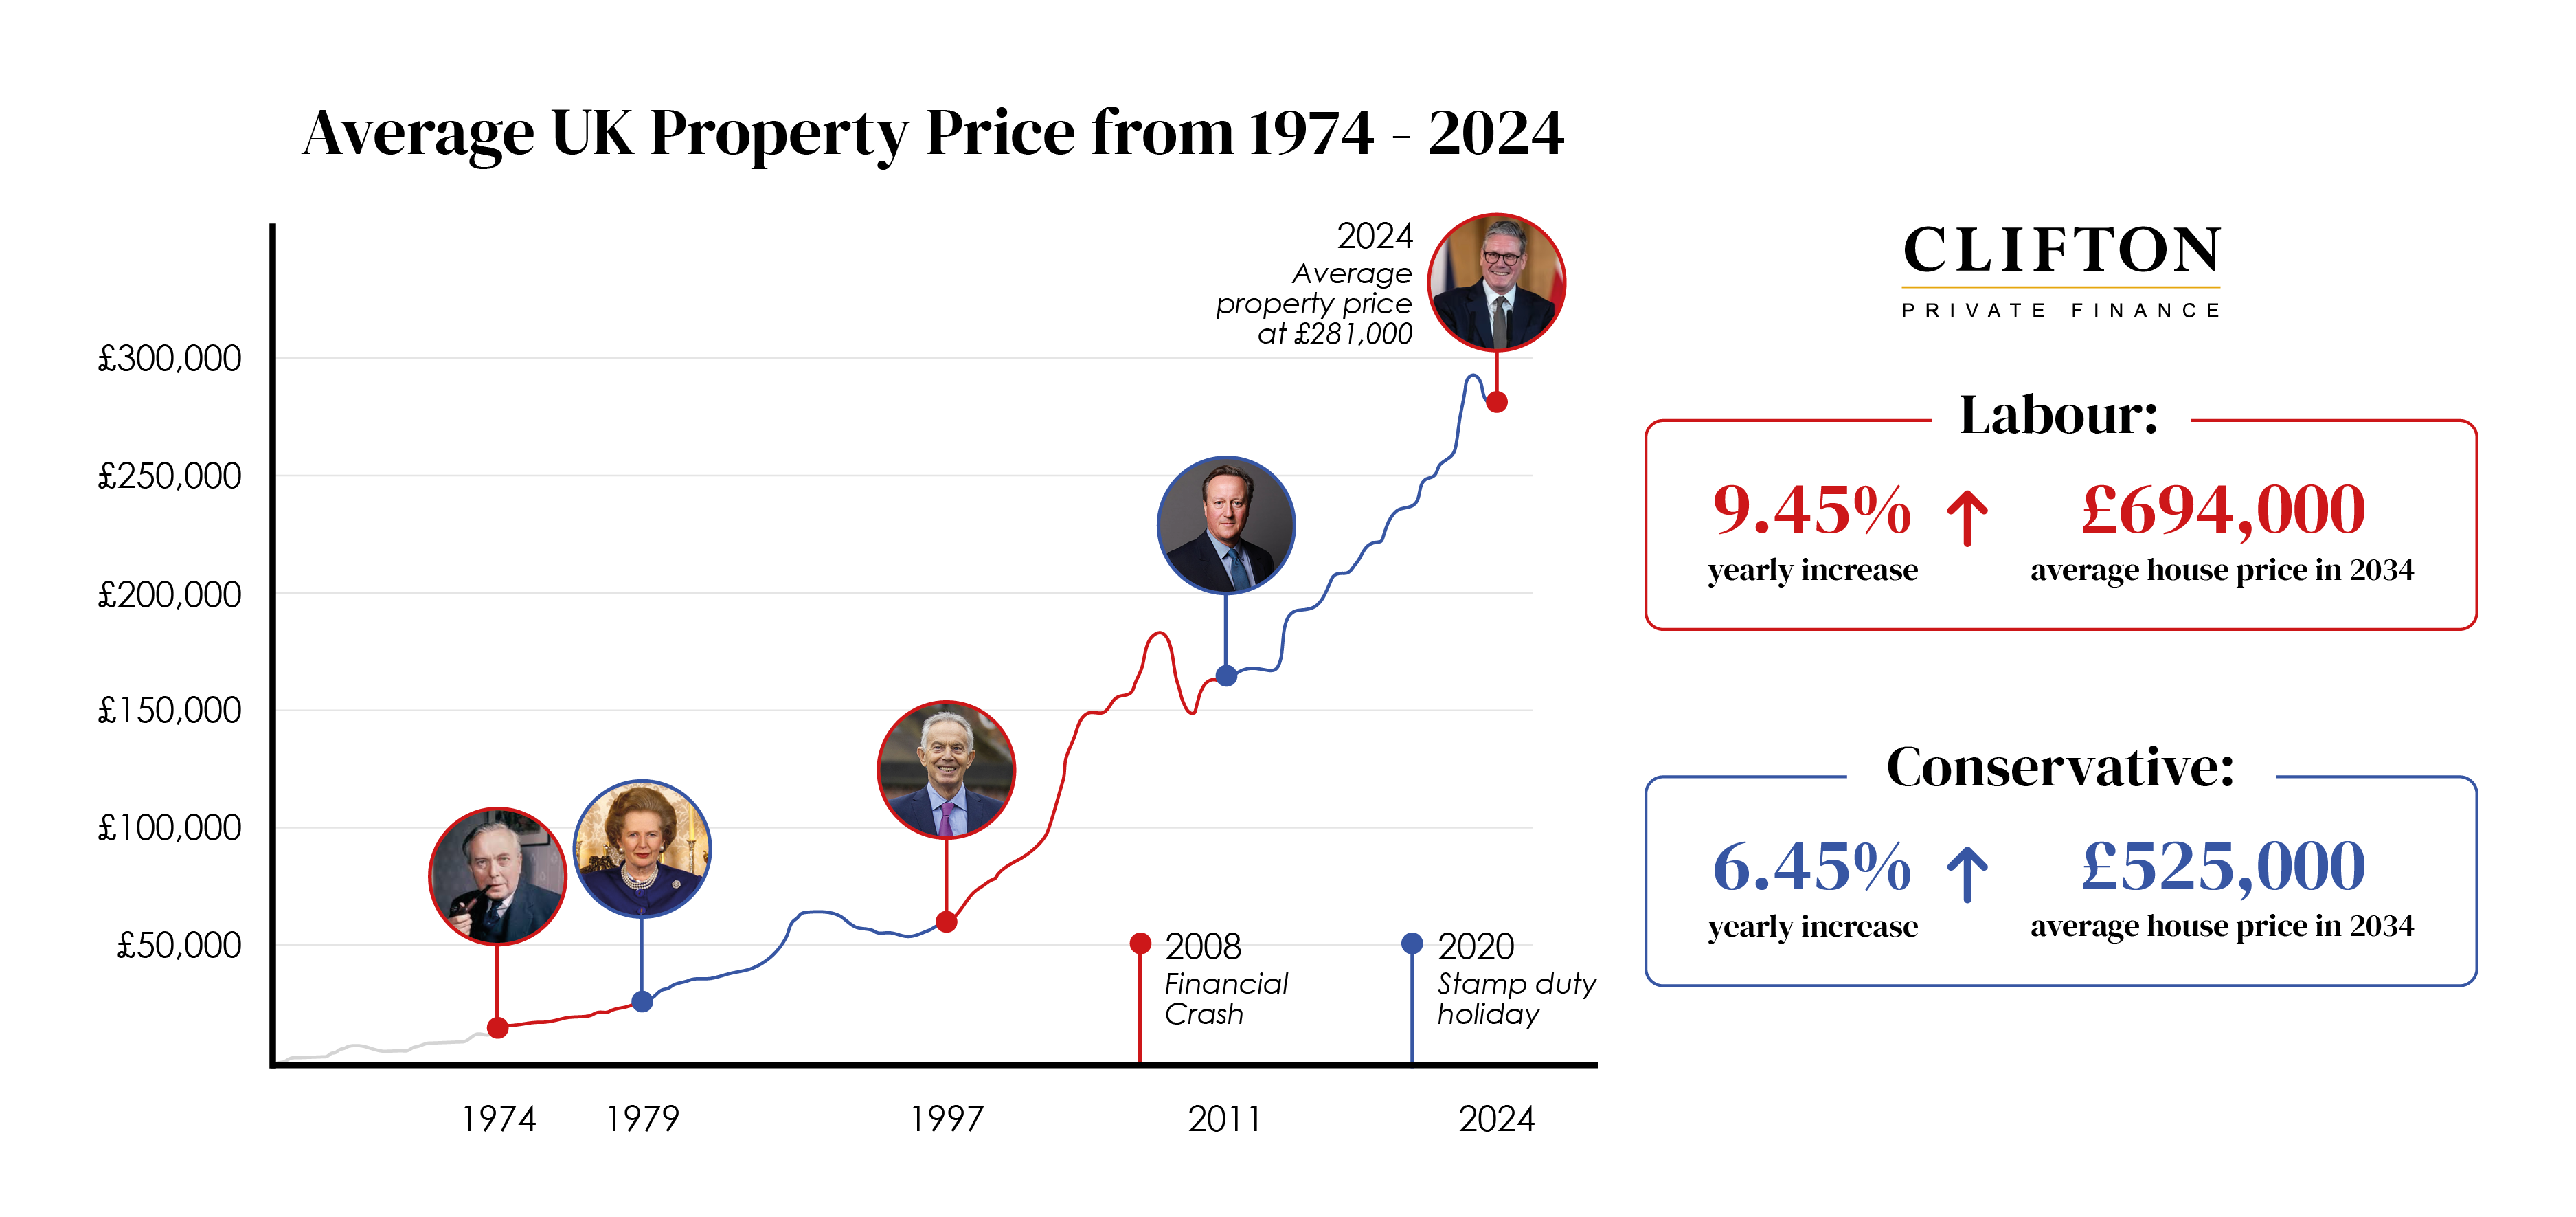 UK Property Prices Under Political Parties